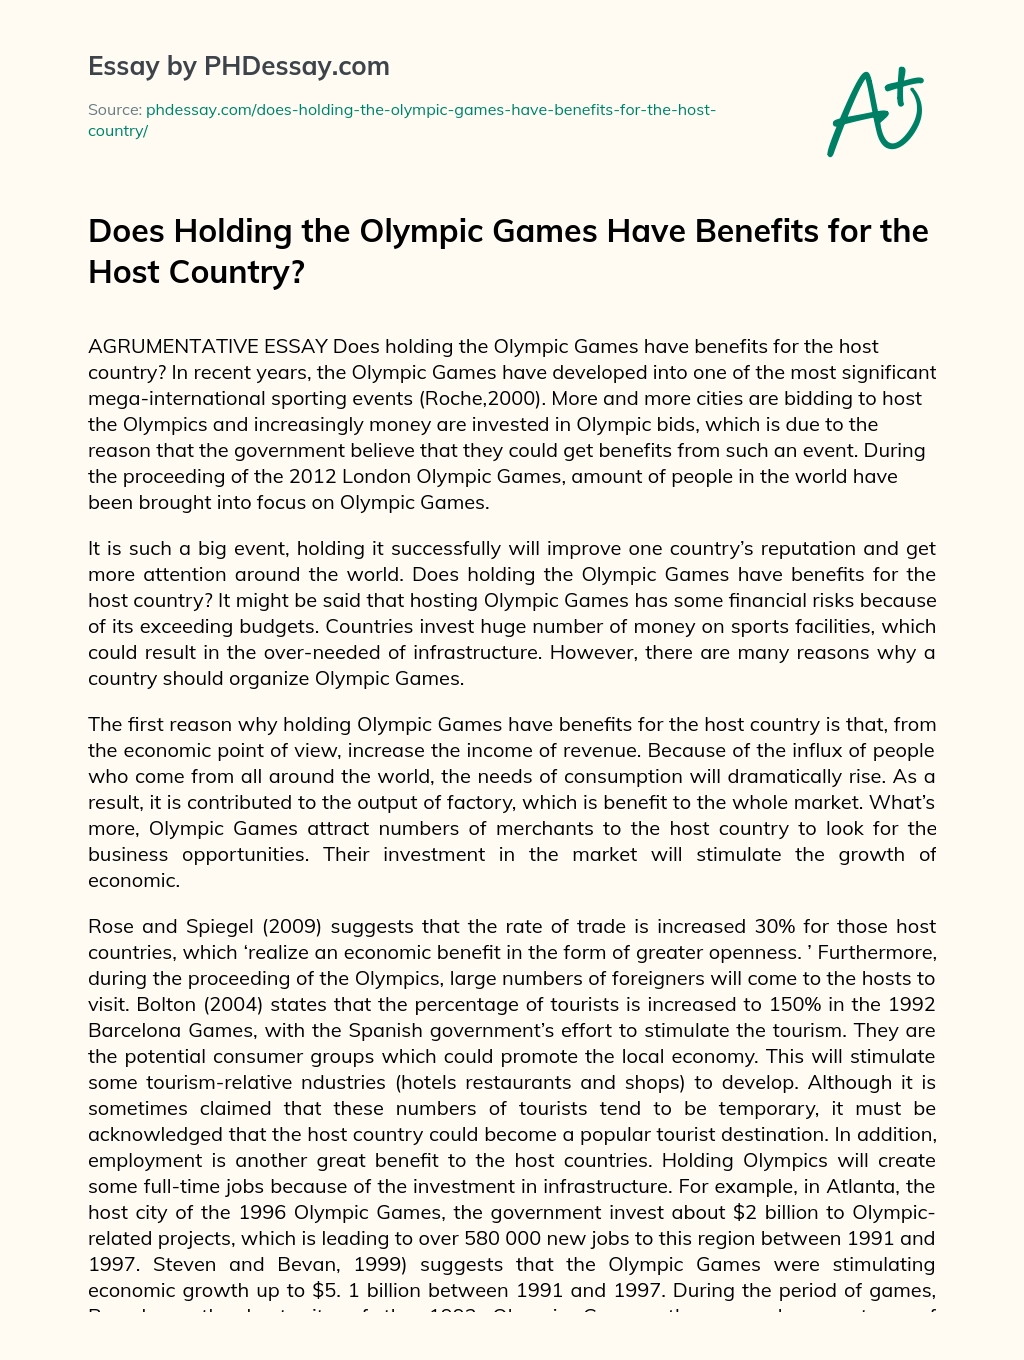 Does Holding the Olympic Games Have Benefits for the Host Country? essay